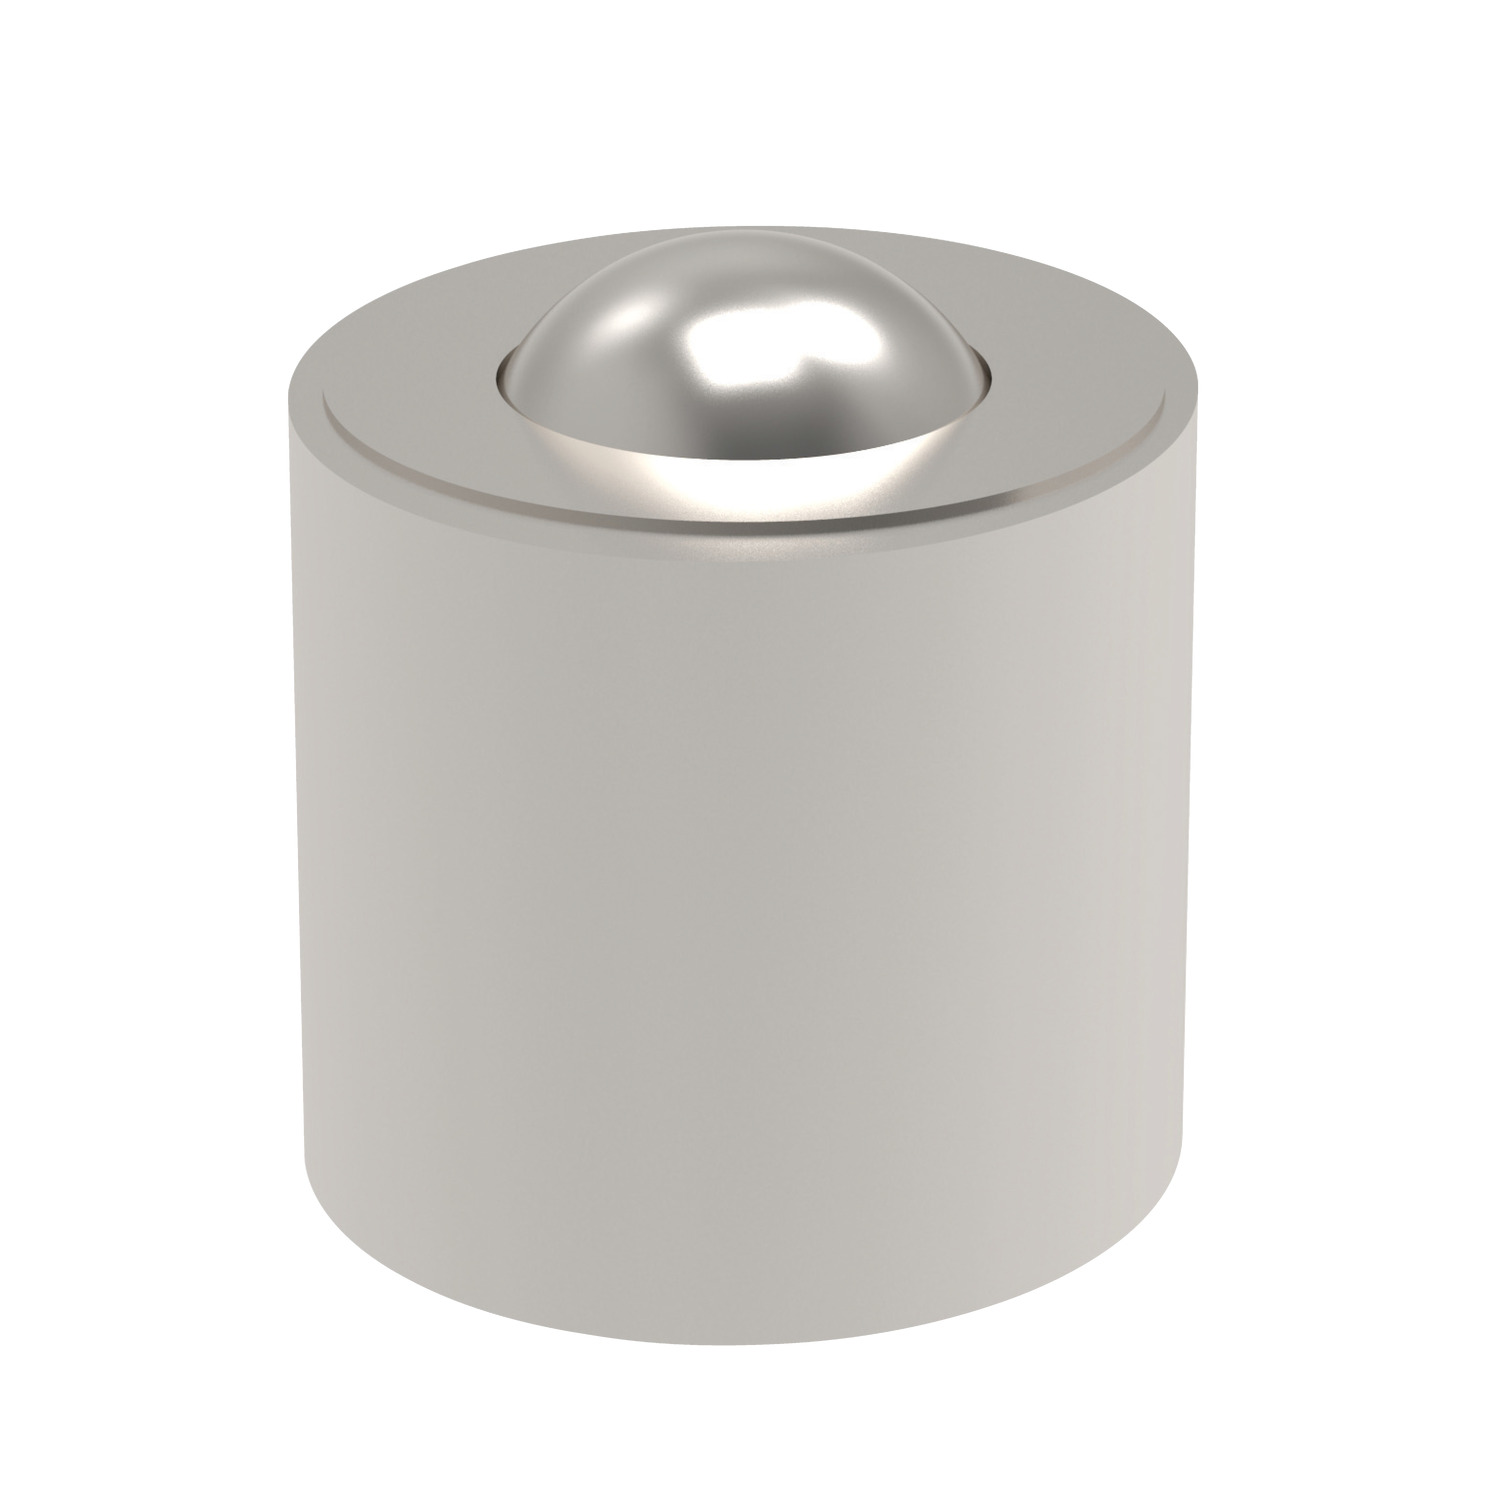 Threaded Ball Transfer Units These ball transfer units are made of a solid steel block with a precision machined hemispherical carrying bowl.